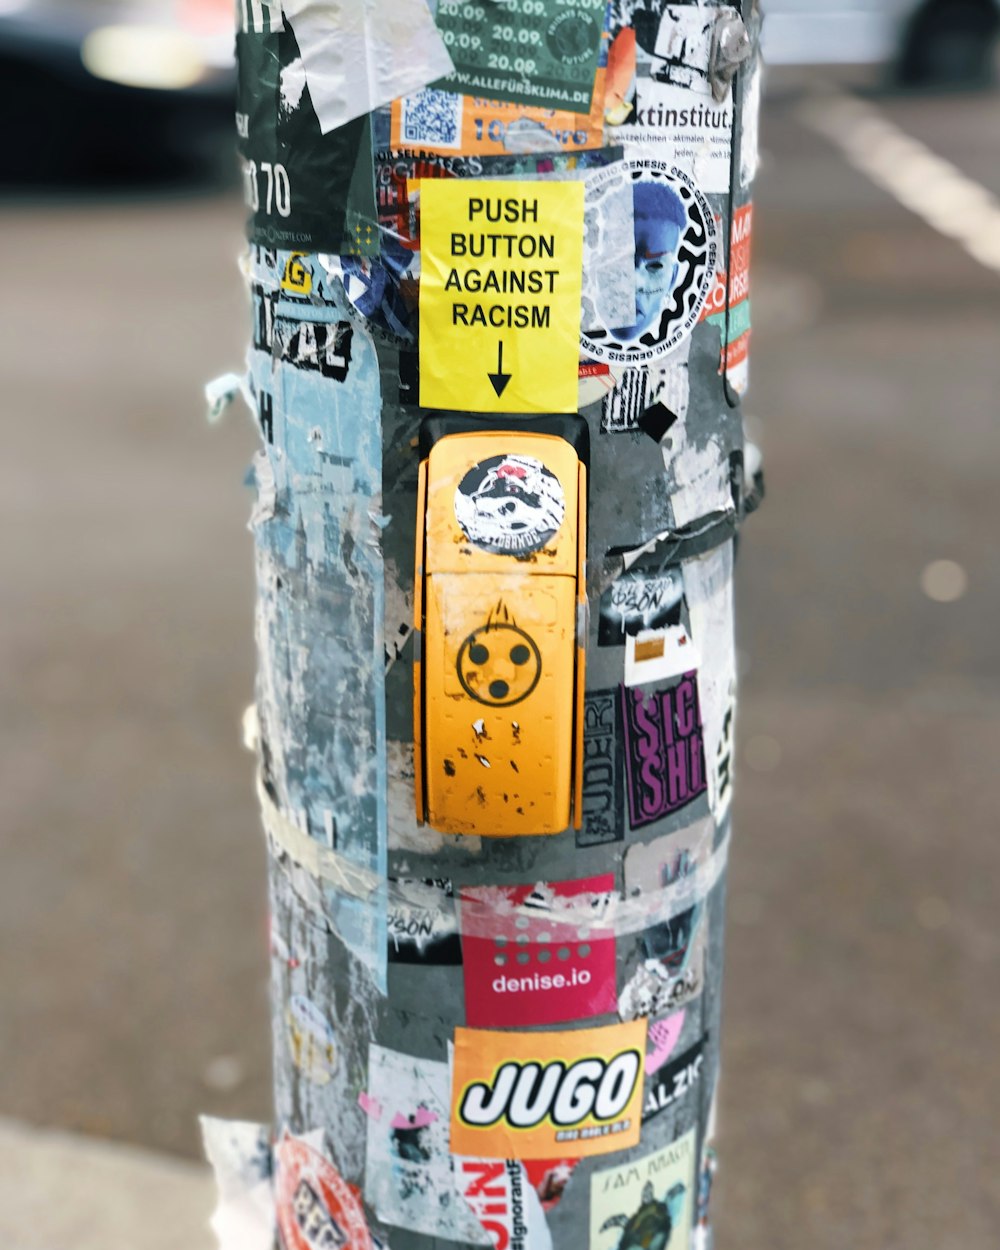 concrete post surrounded by posters